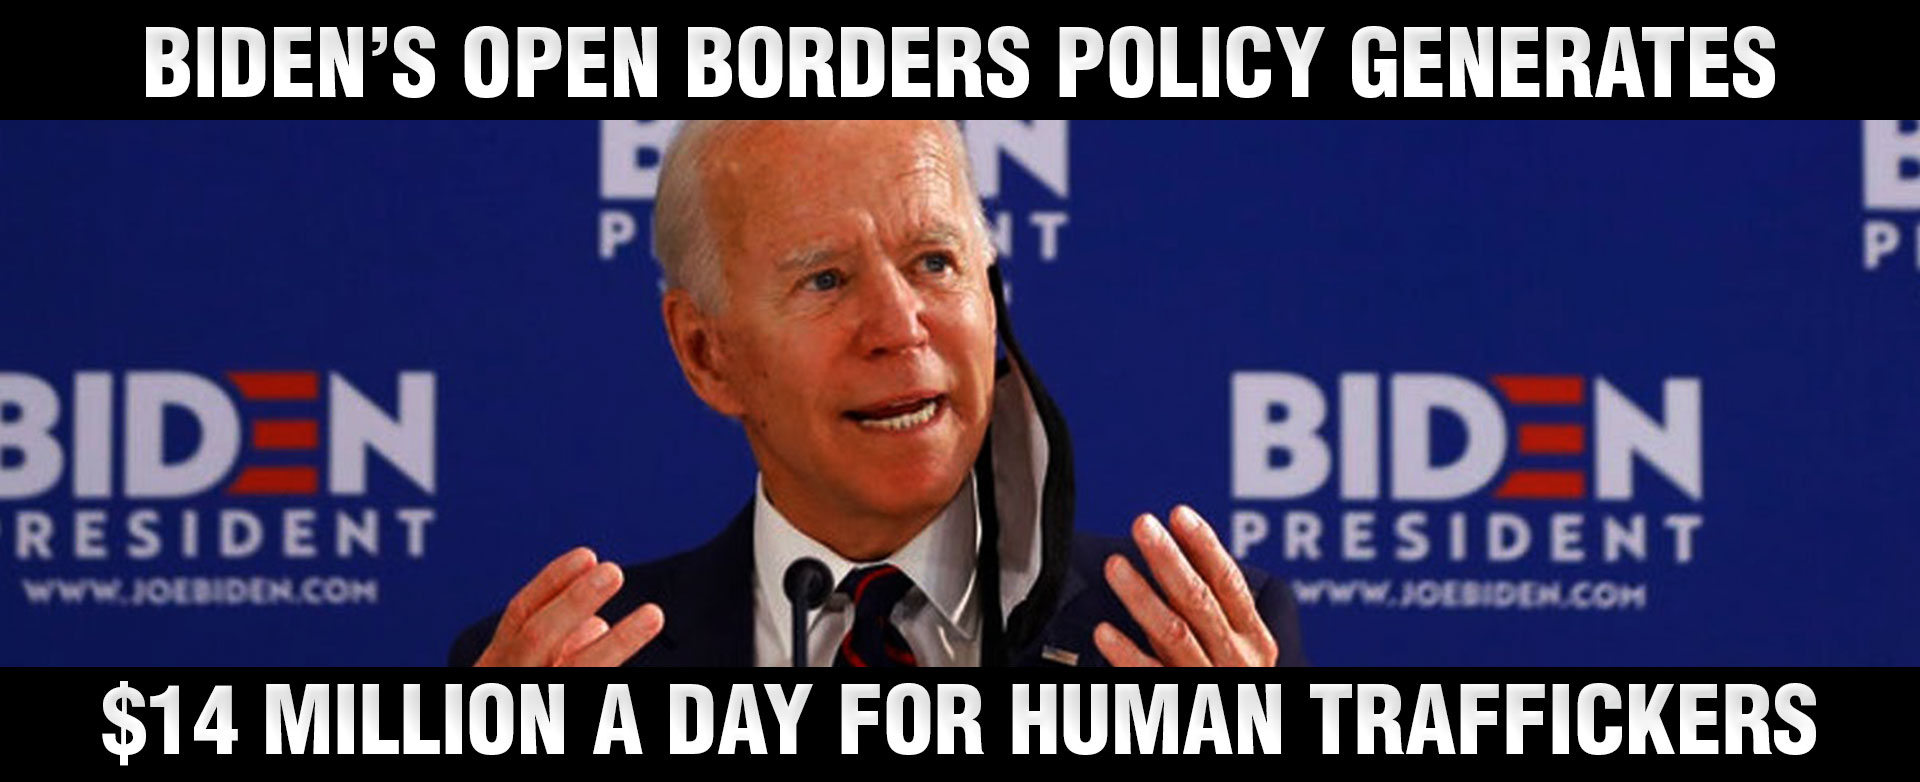 MyPatriotsNetwork-Biden’s Open Borders Policy Generates $14 Million a DAY for Human Traffickers